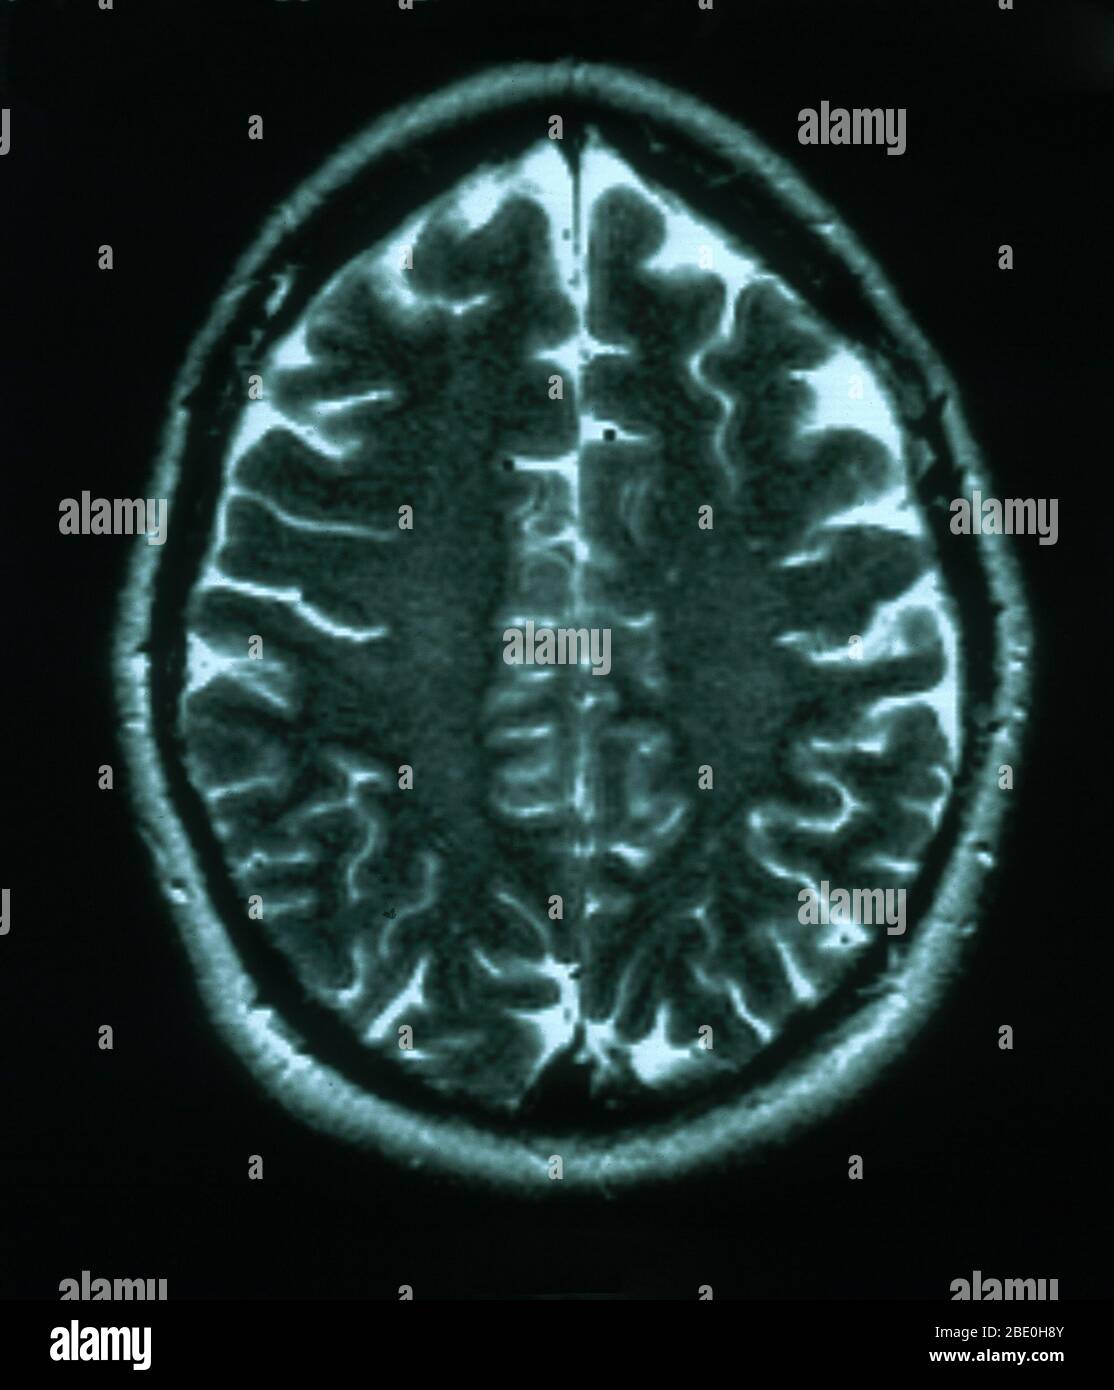 MRI scan, T2 weighted, axial view through the brain of a 54 year old ...